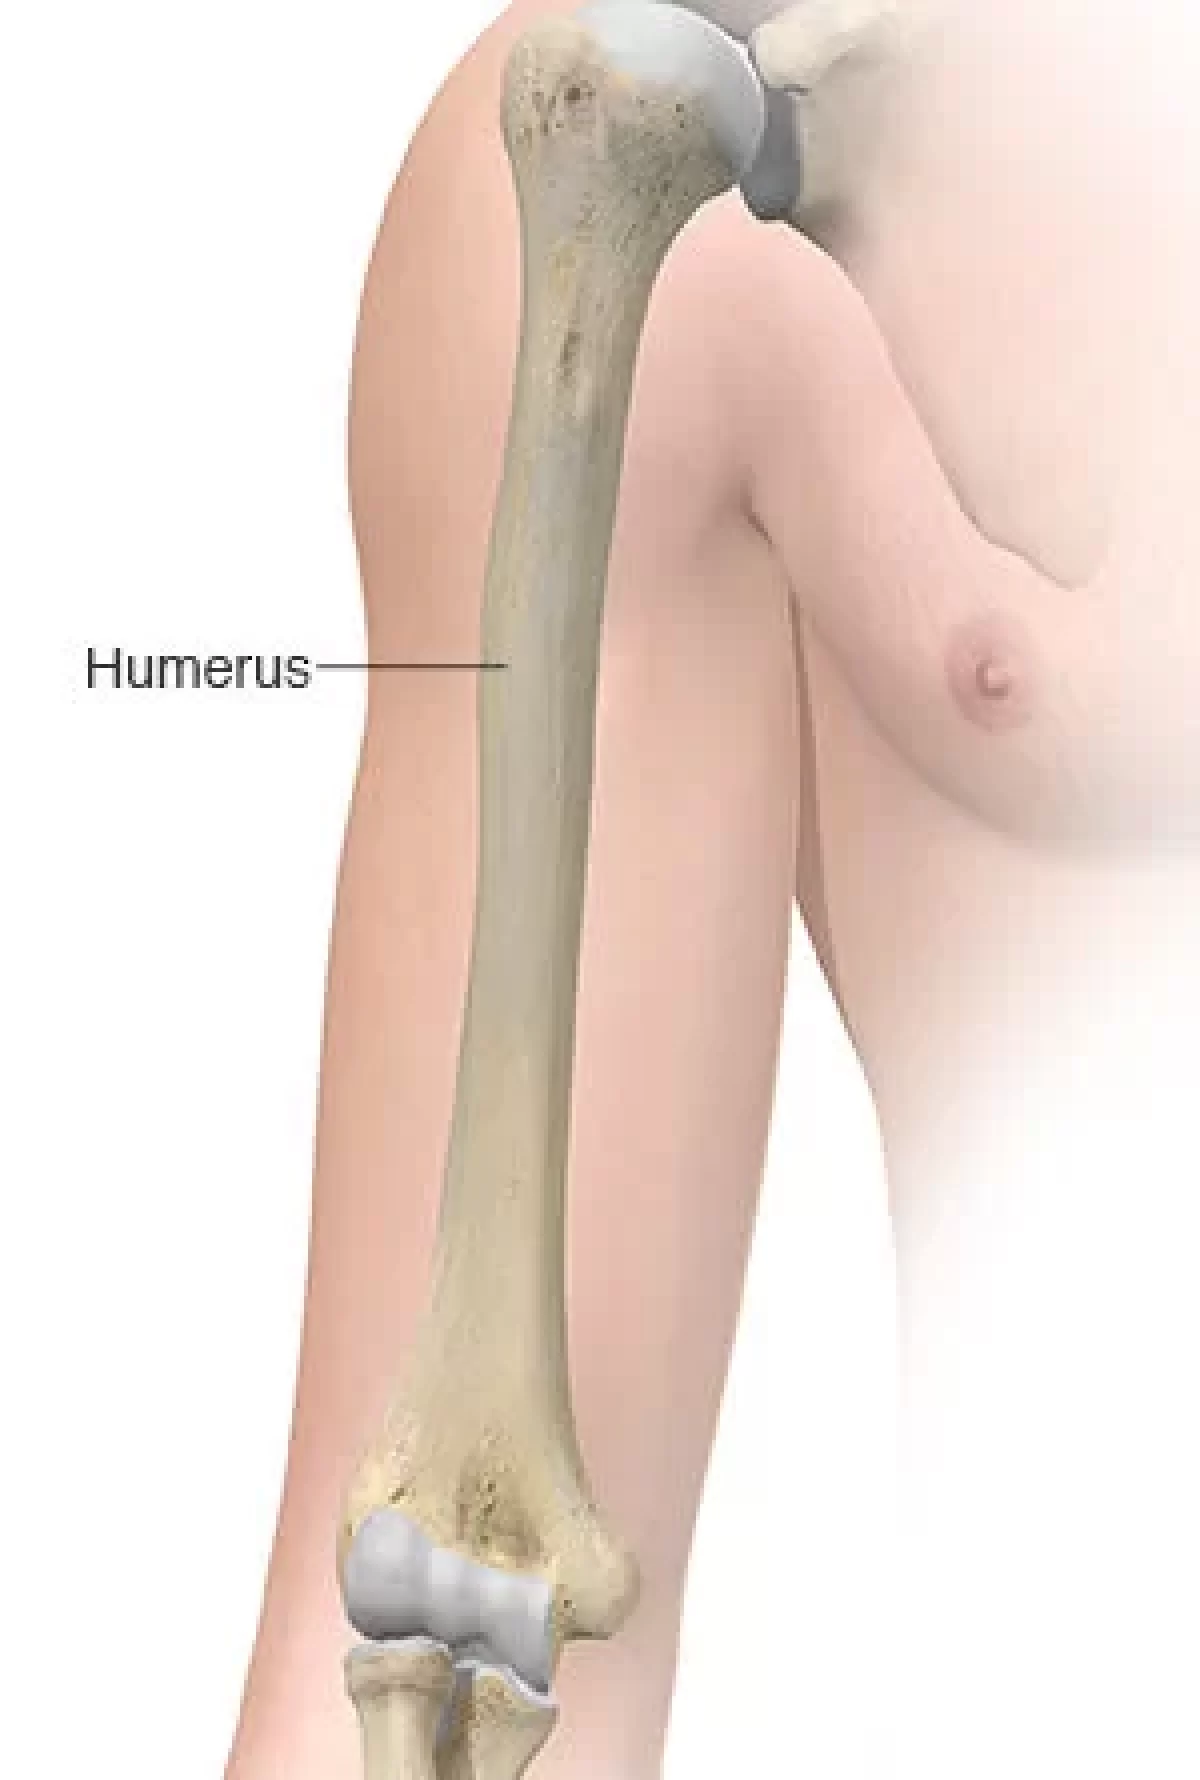 Humerus – Definition, Location, Anatomy, Functions, and Diagram